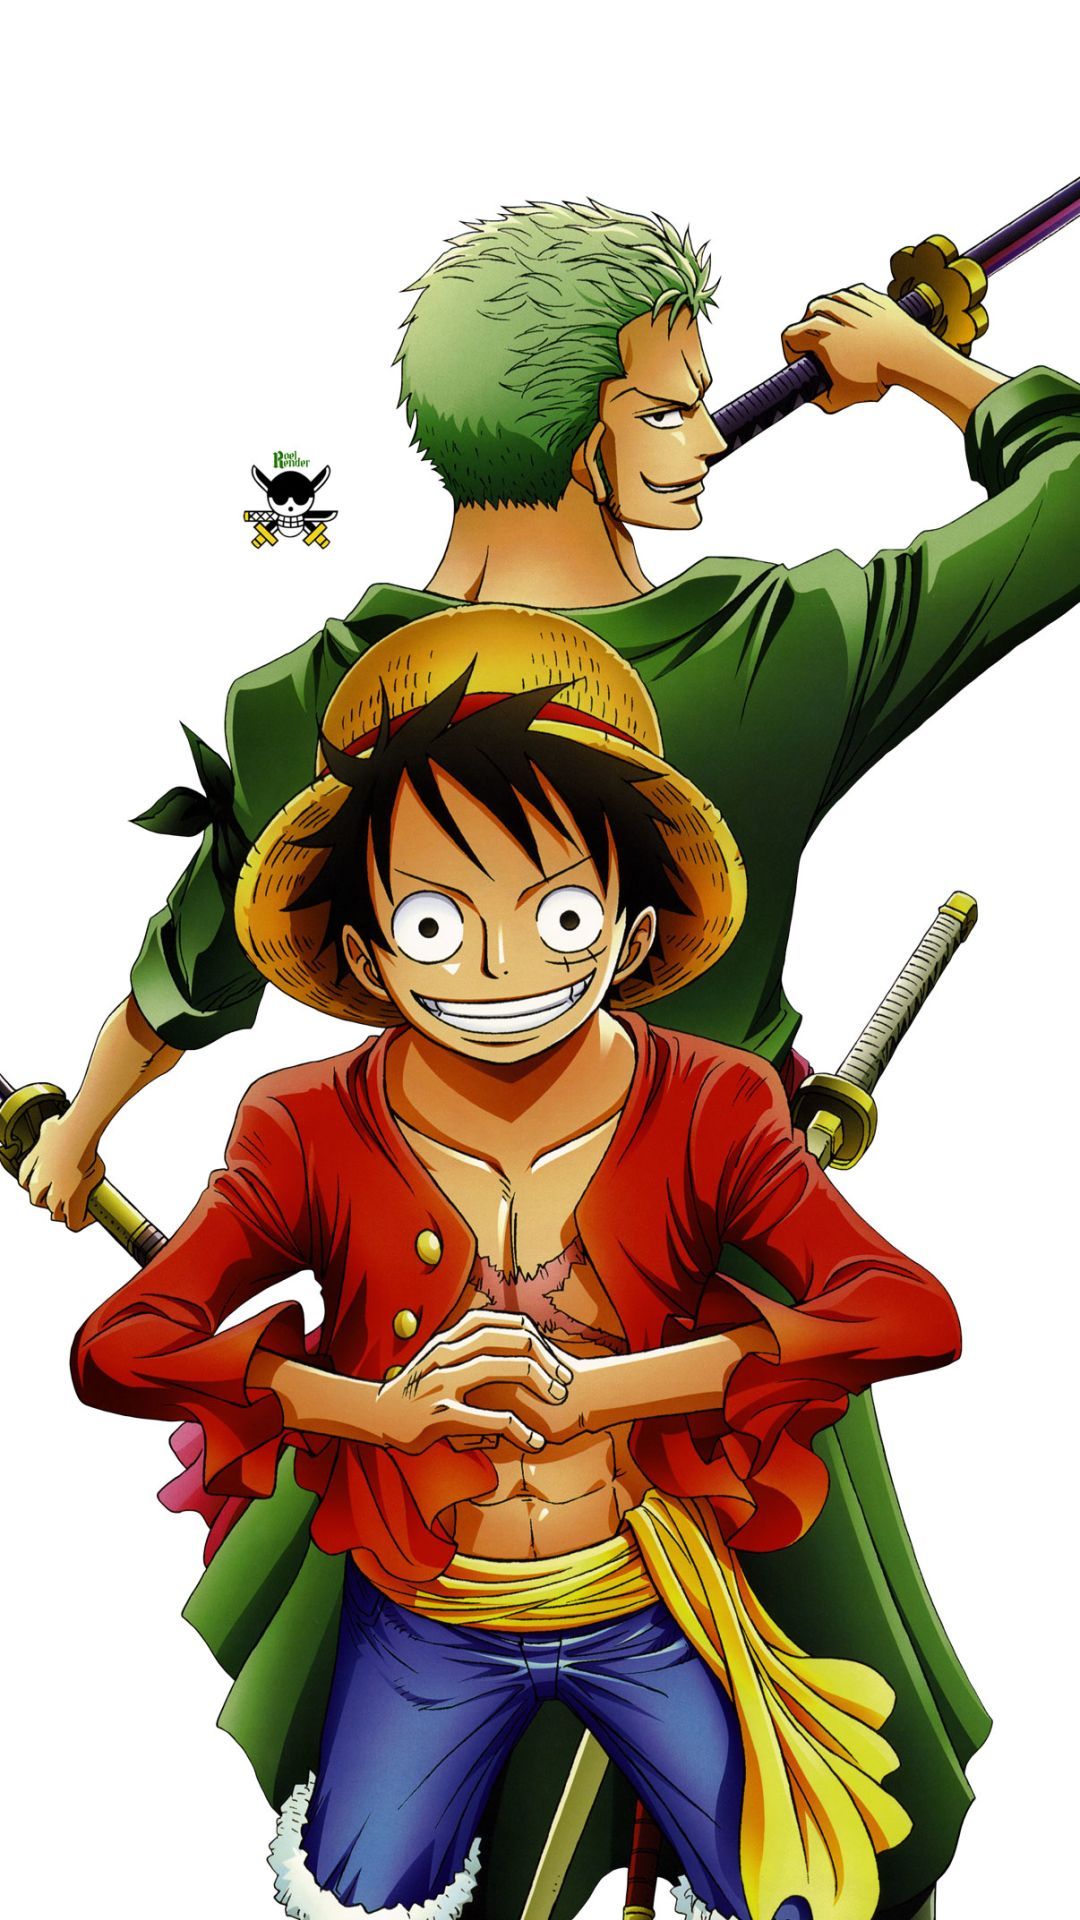 Luffy One Piece Image Is Best Wallpaper on flowerswallpaper.info, if you like it. #iphone #android #w. Anime wallpaper iphone, One piece image, Cartoon wallpaper